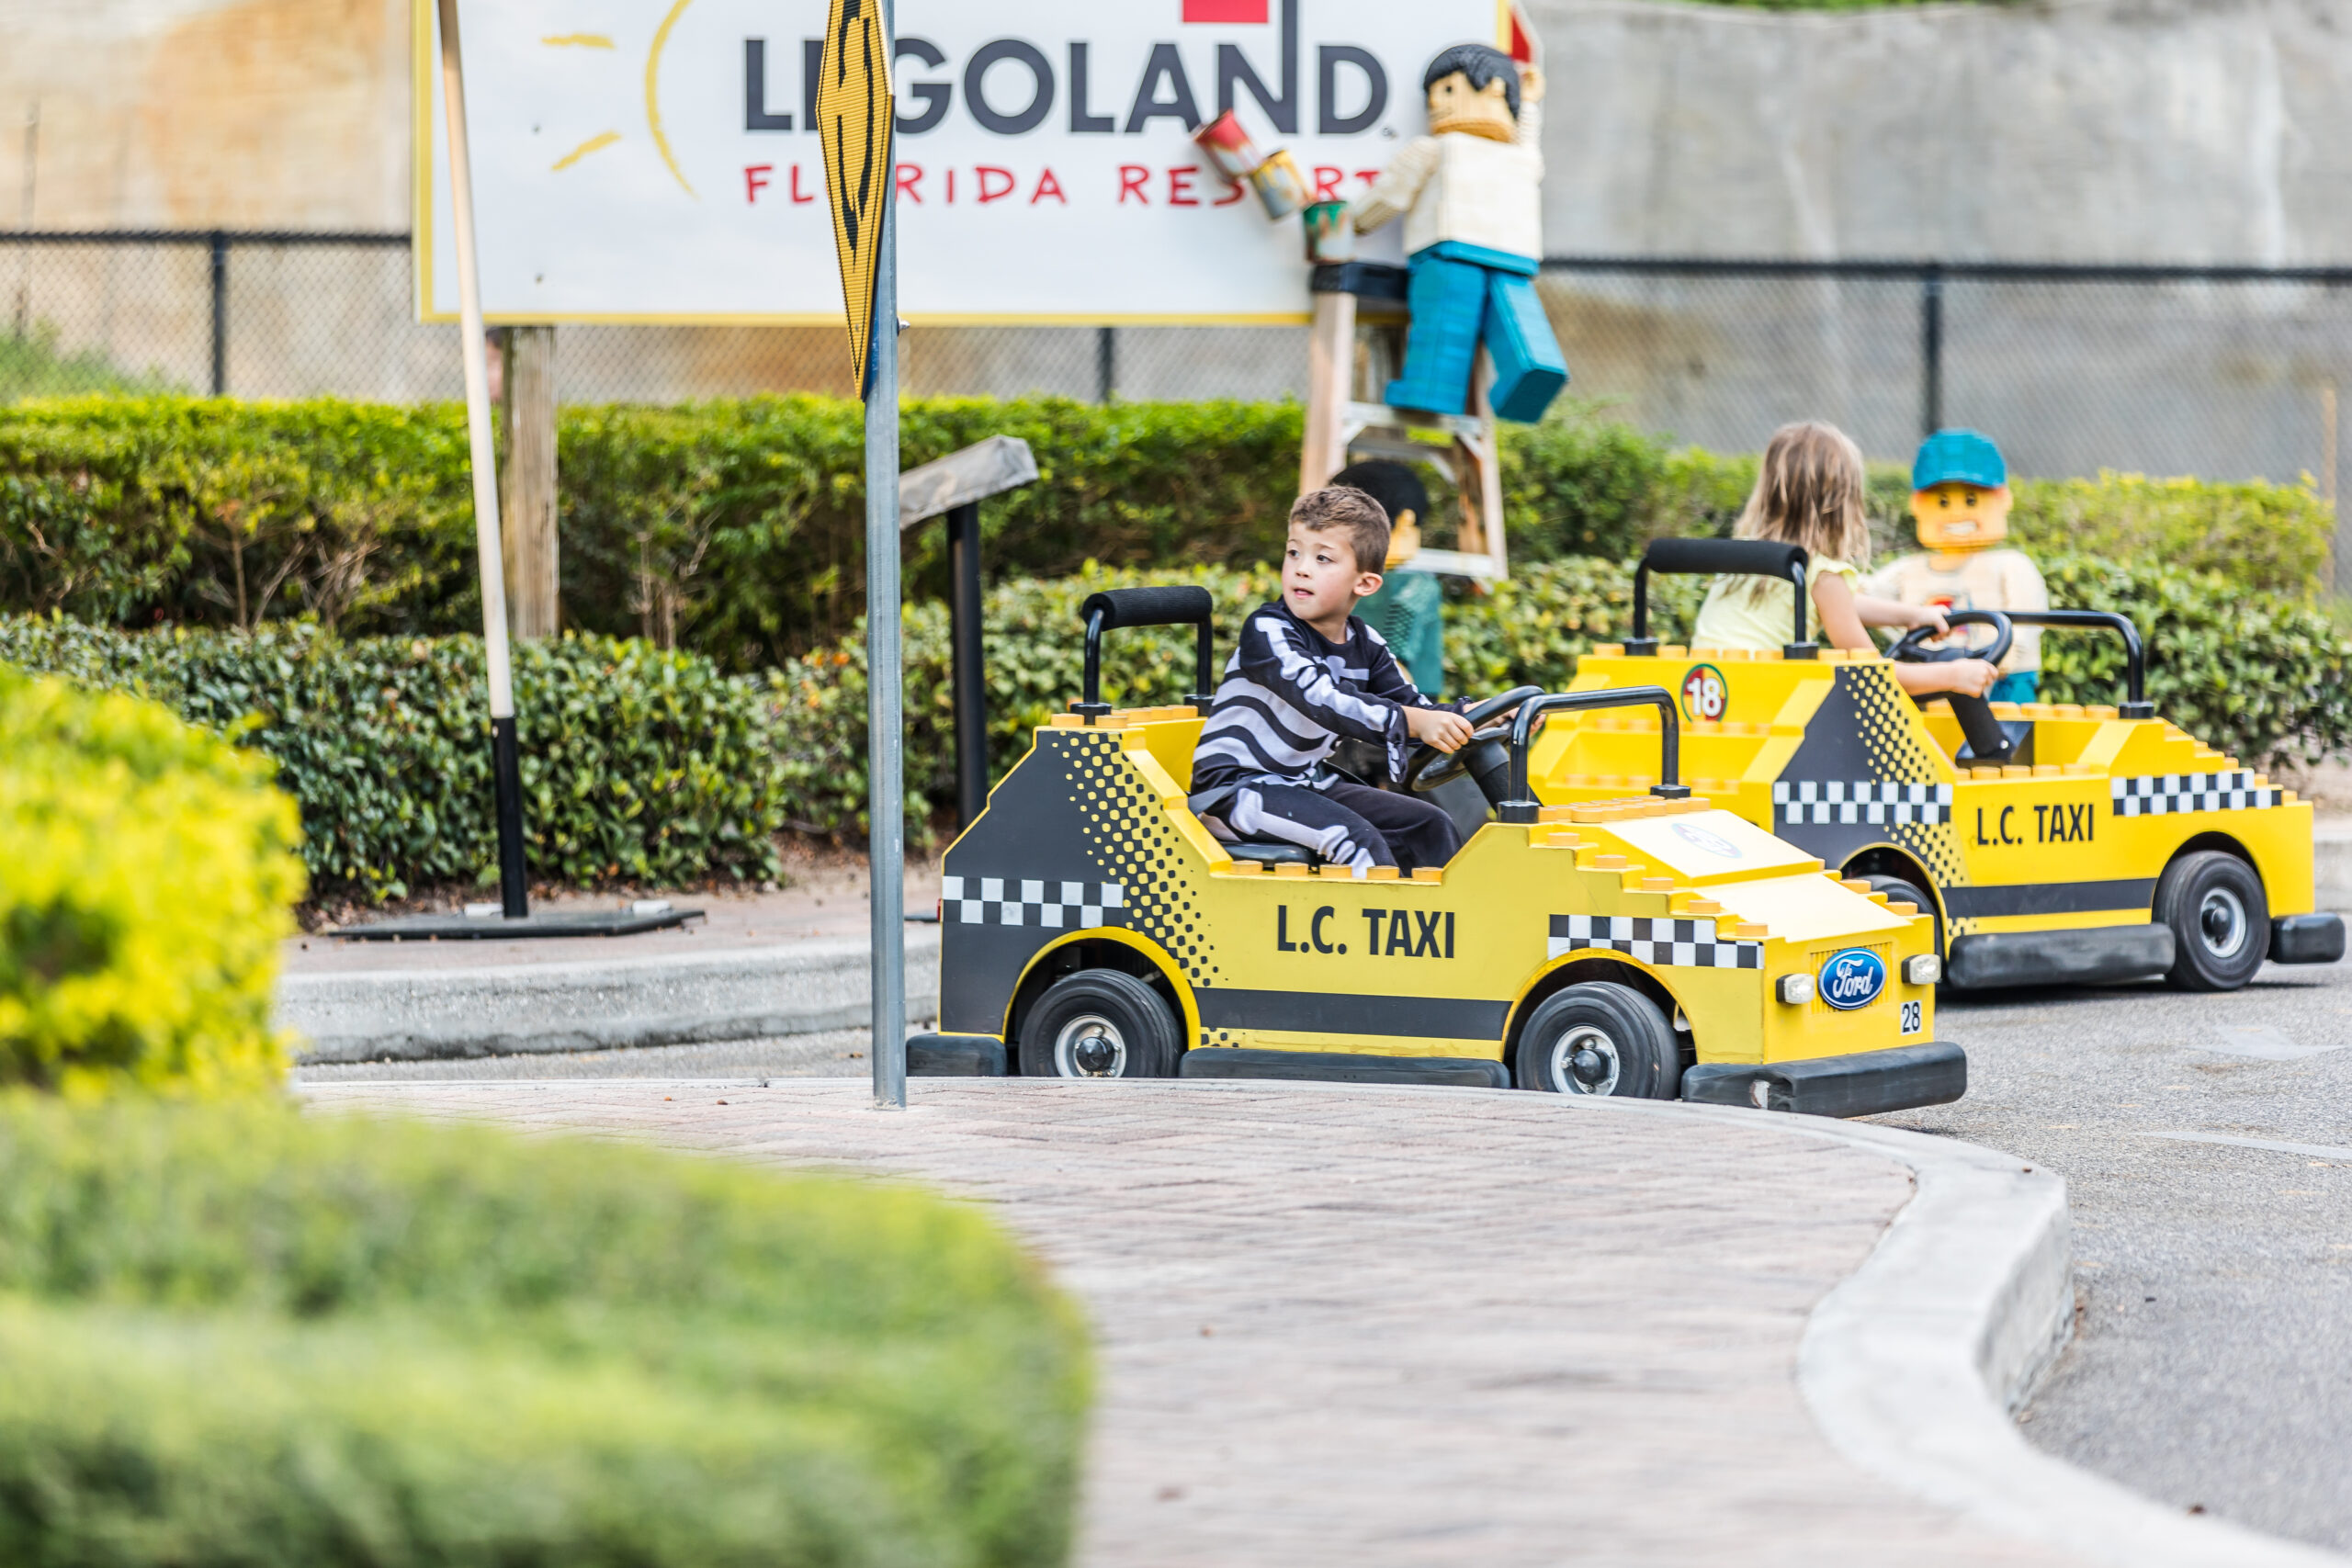 5 Things to Know Before Going to Legoland with your Special Needs kid! #legoland #legolandfl #specialneedslegoland #legospecialneeds #autismlegoland